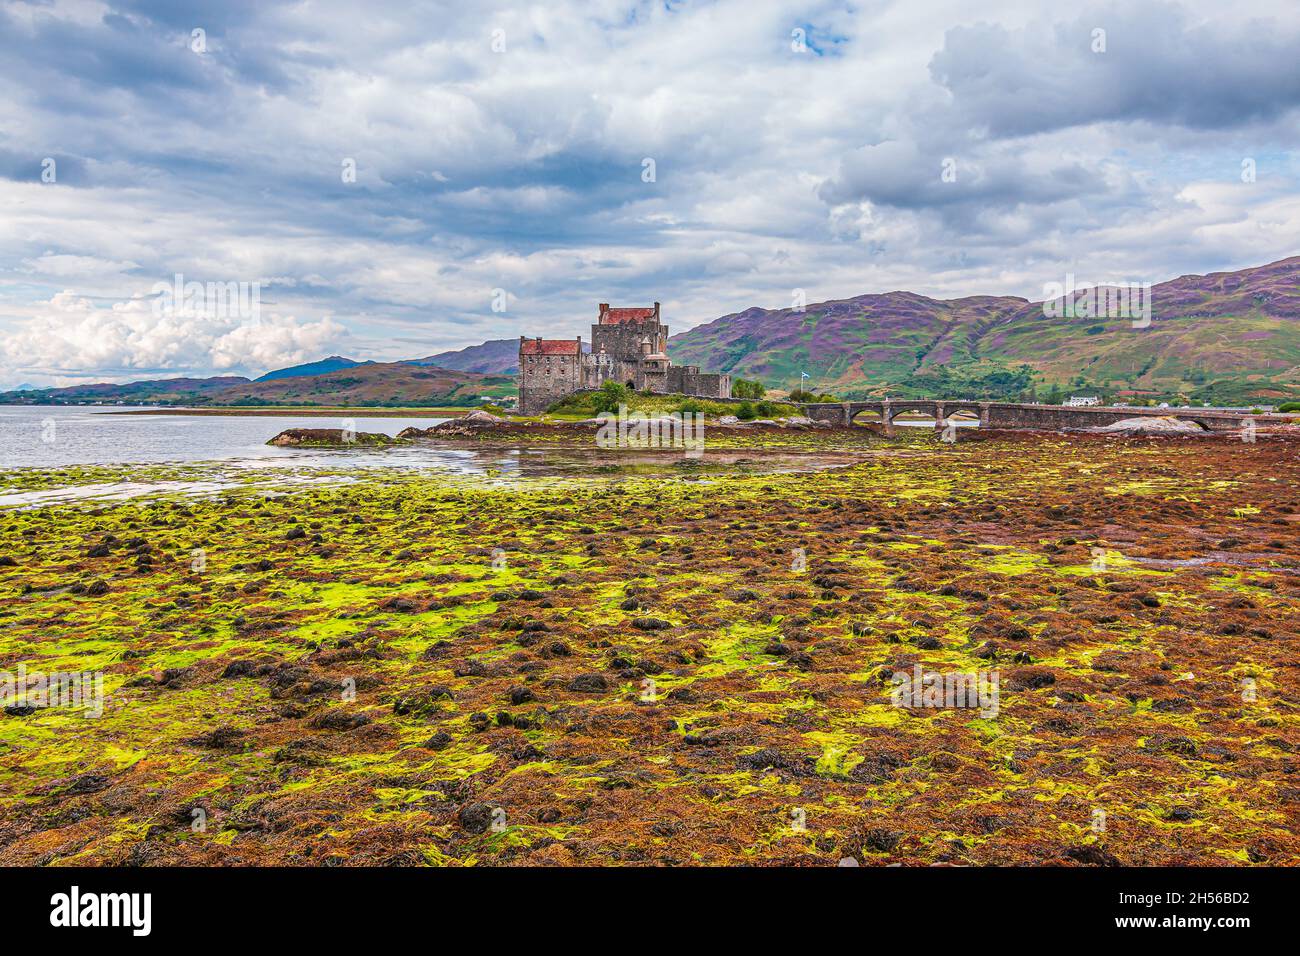 Lake with the island of Eilean Donan Castle in summer at low tide. Stone bridge to the castle with archways. Rocks and stones with green algae in the Stock Photo